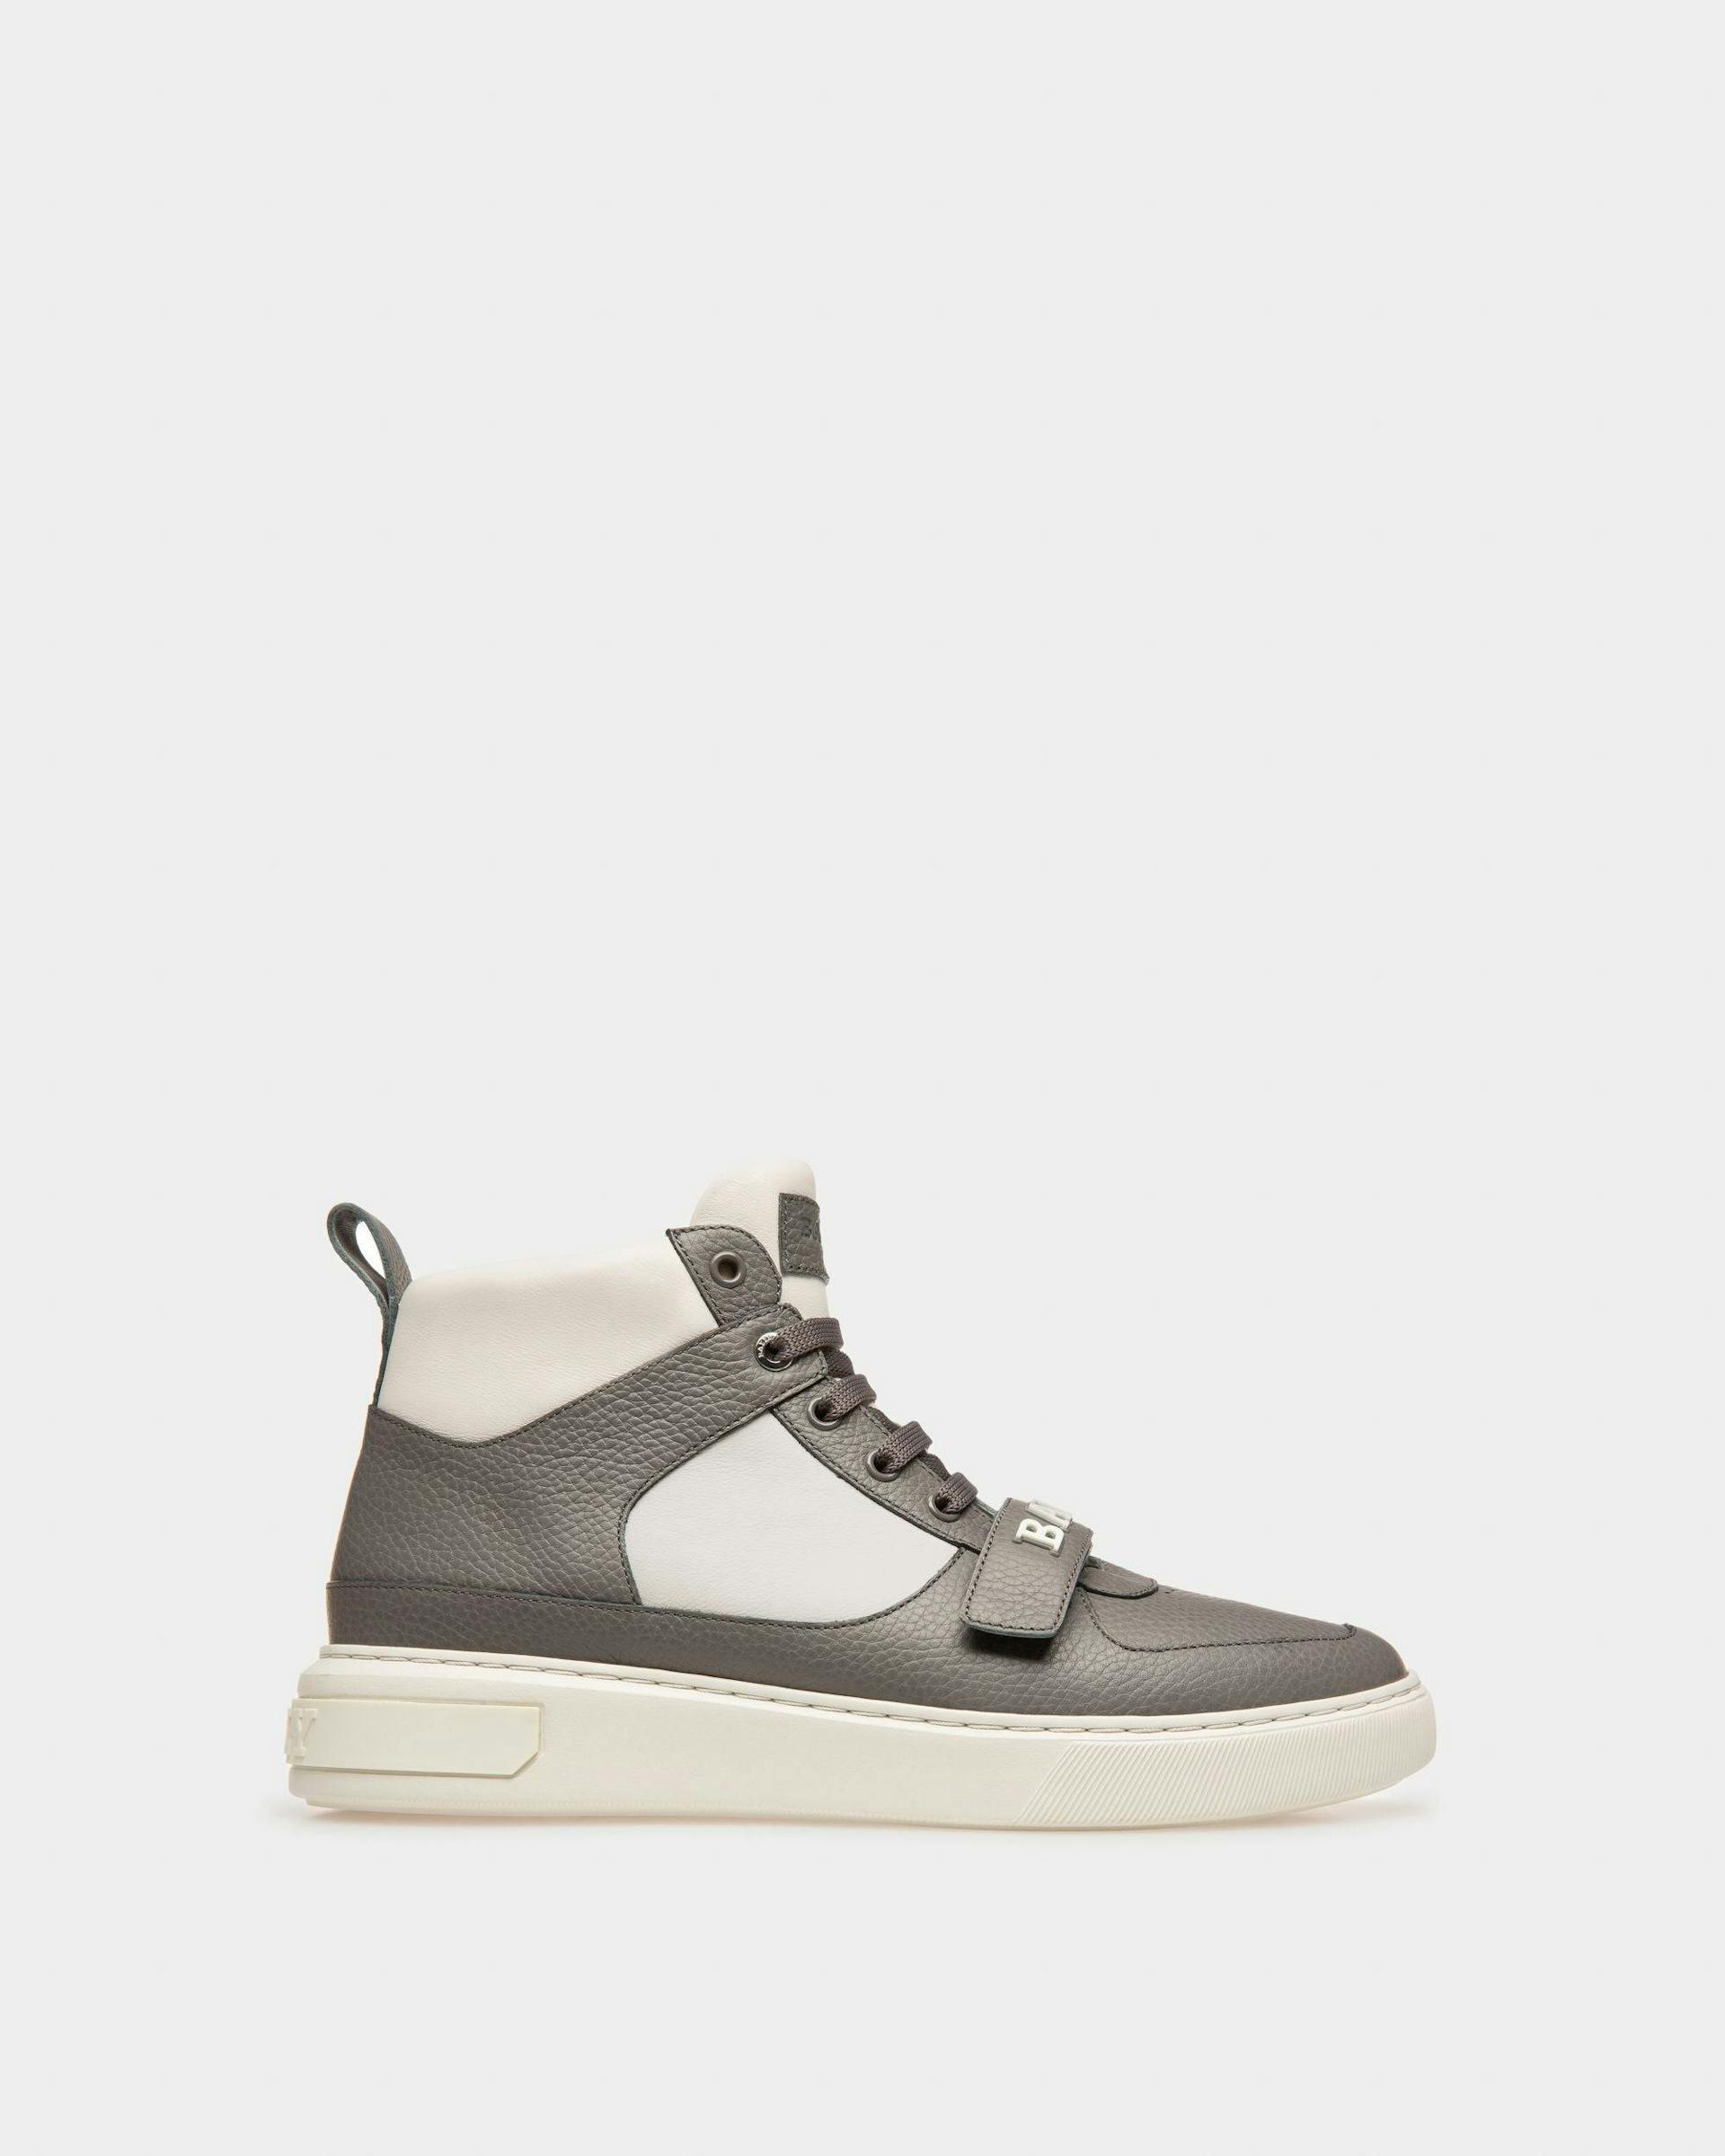 Merryk Leather Sneakers In Grey And White - Men's - Bally - 01